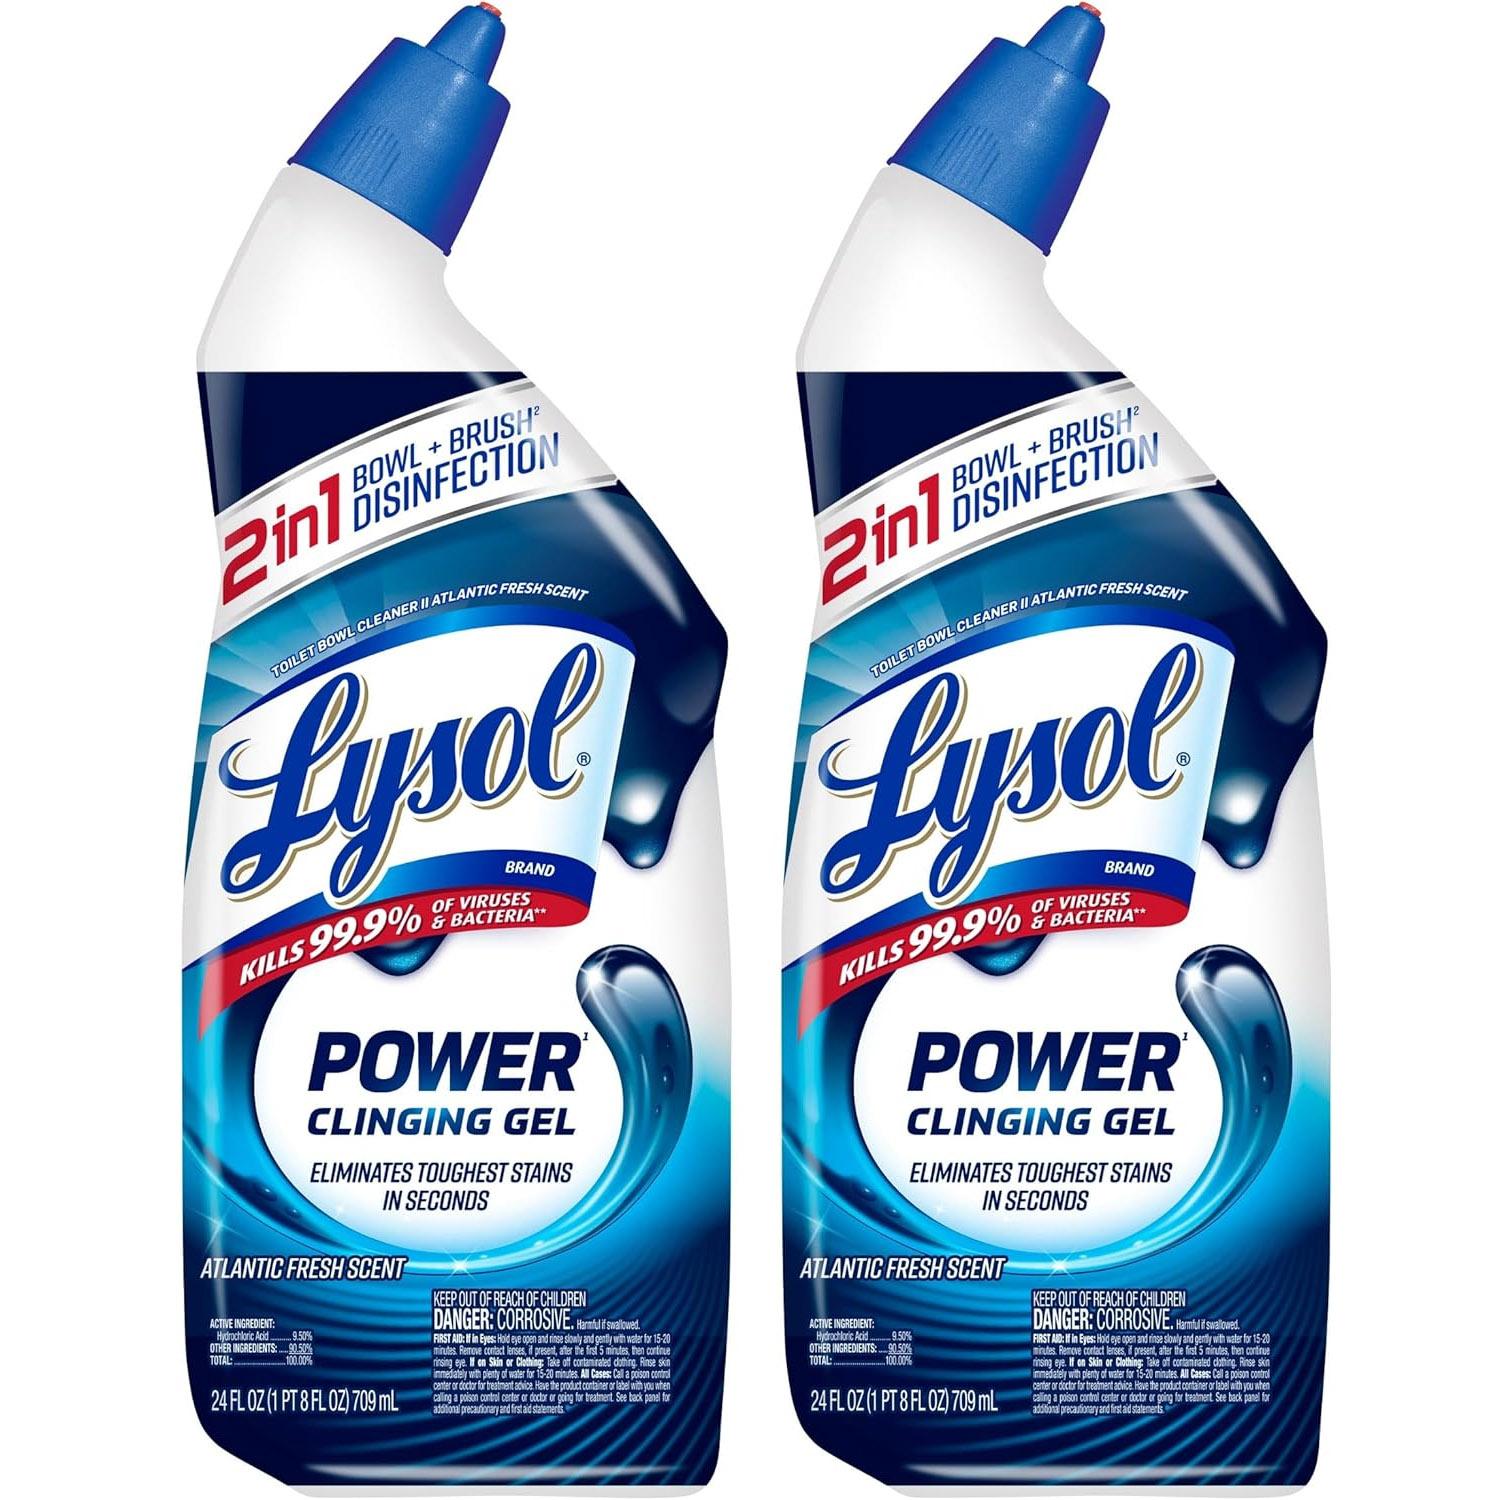 Lysol Power Toilet Bowl Cleaner Gel 2 Pack for $3.08 Shipped